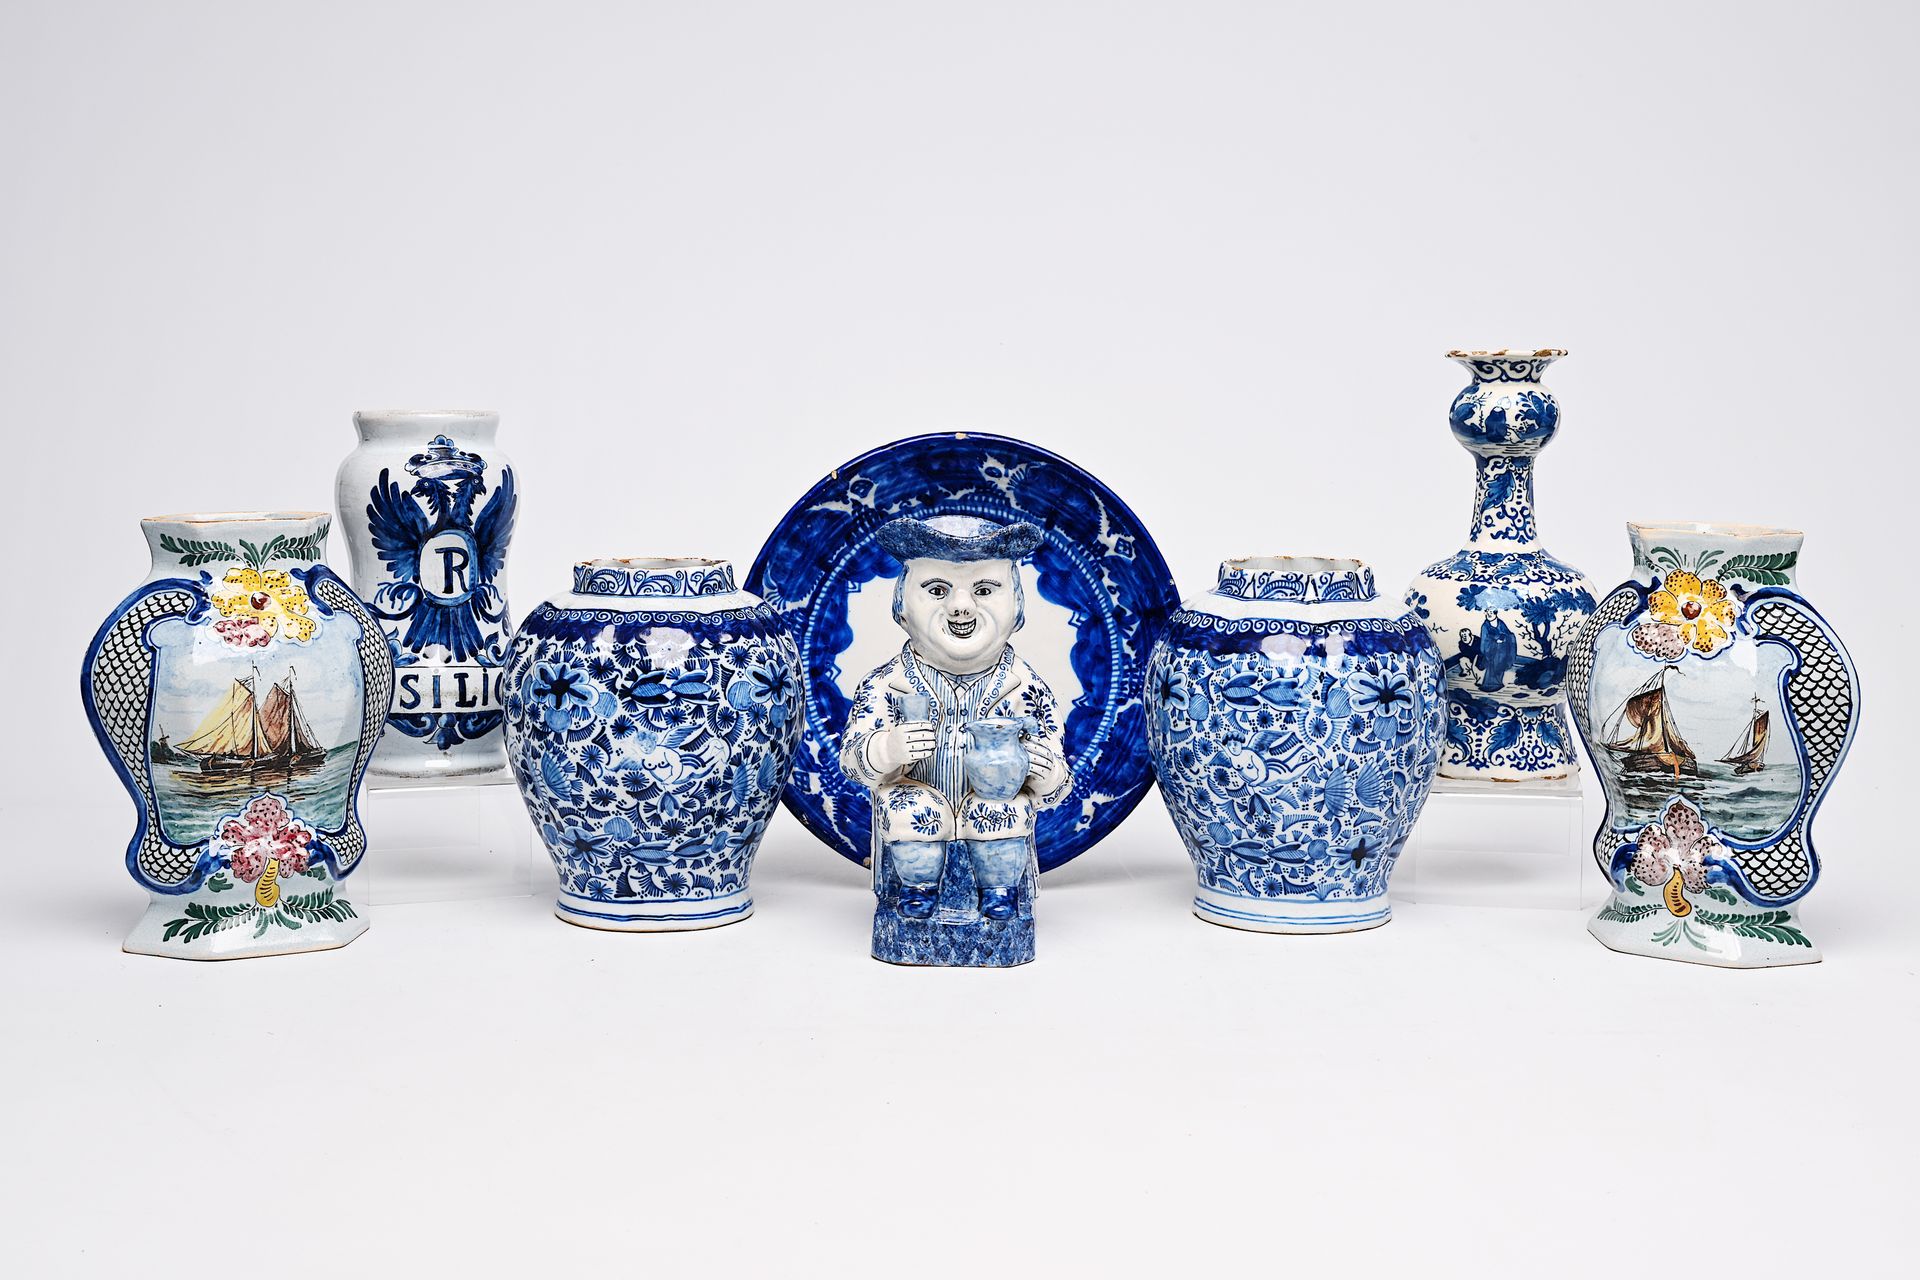 A varied collection of blue, white and polychrome earthenware items, Delft, Fran&hellip;